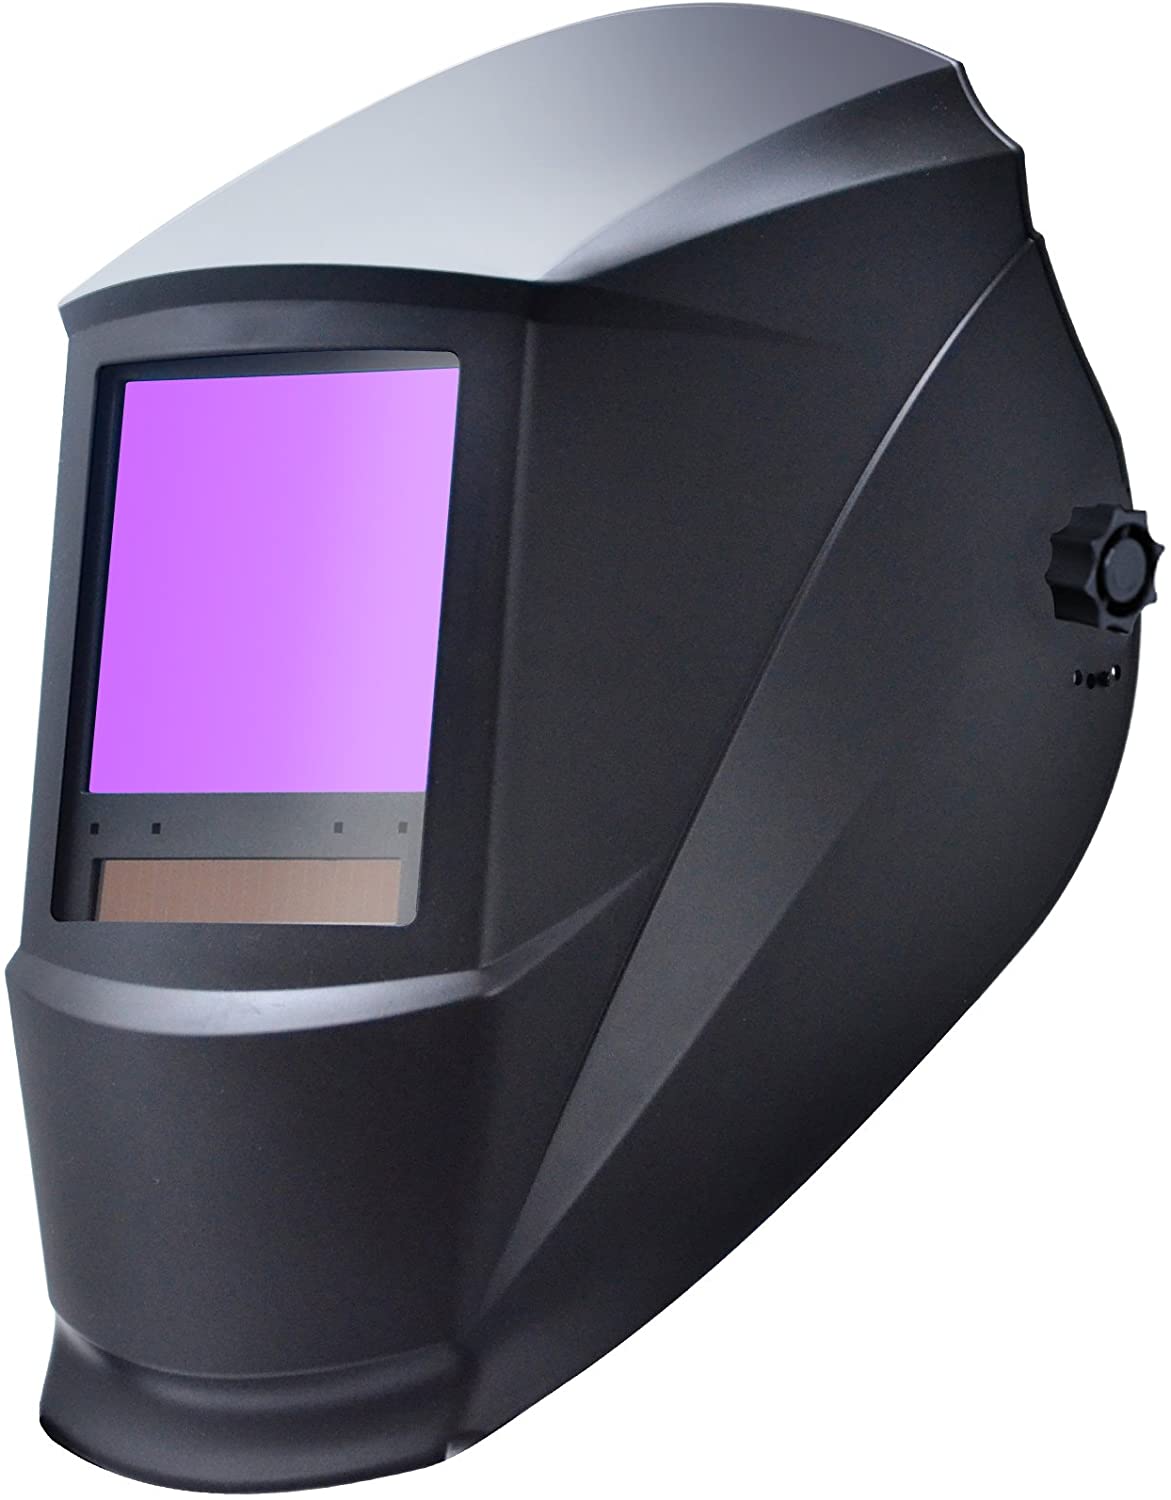 Antra AH7-860-0000 True Color Auto Darkening Welding Helmet Viewing Size 3.86X3.5 Wide Shade Range 4:5-13 for TIG MIG:MAG MMA Plasma, Grinding, Solar Power Assist, 6+1 Extra Lens Covers